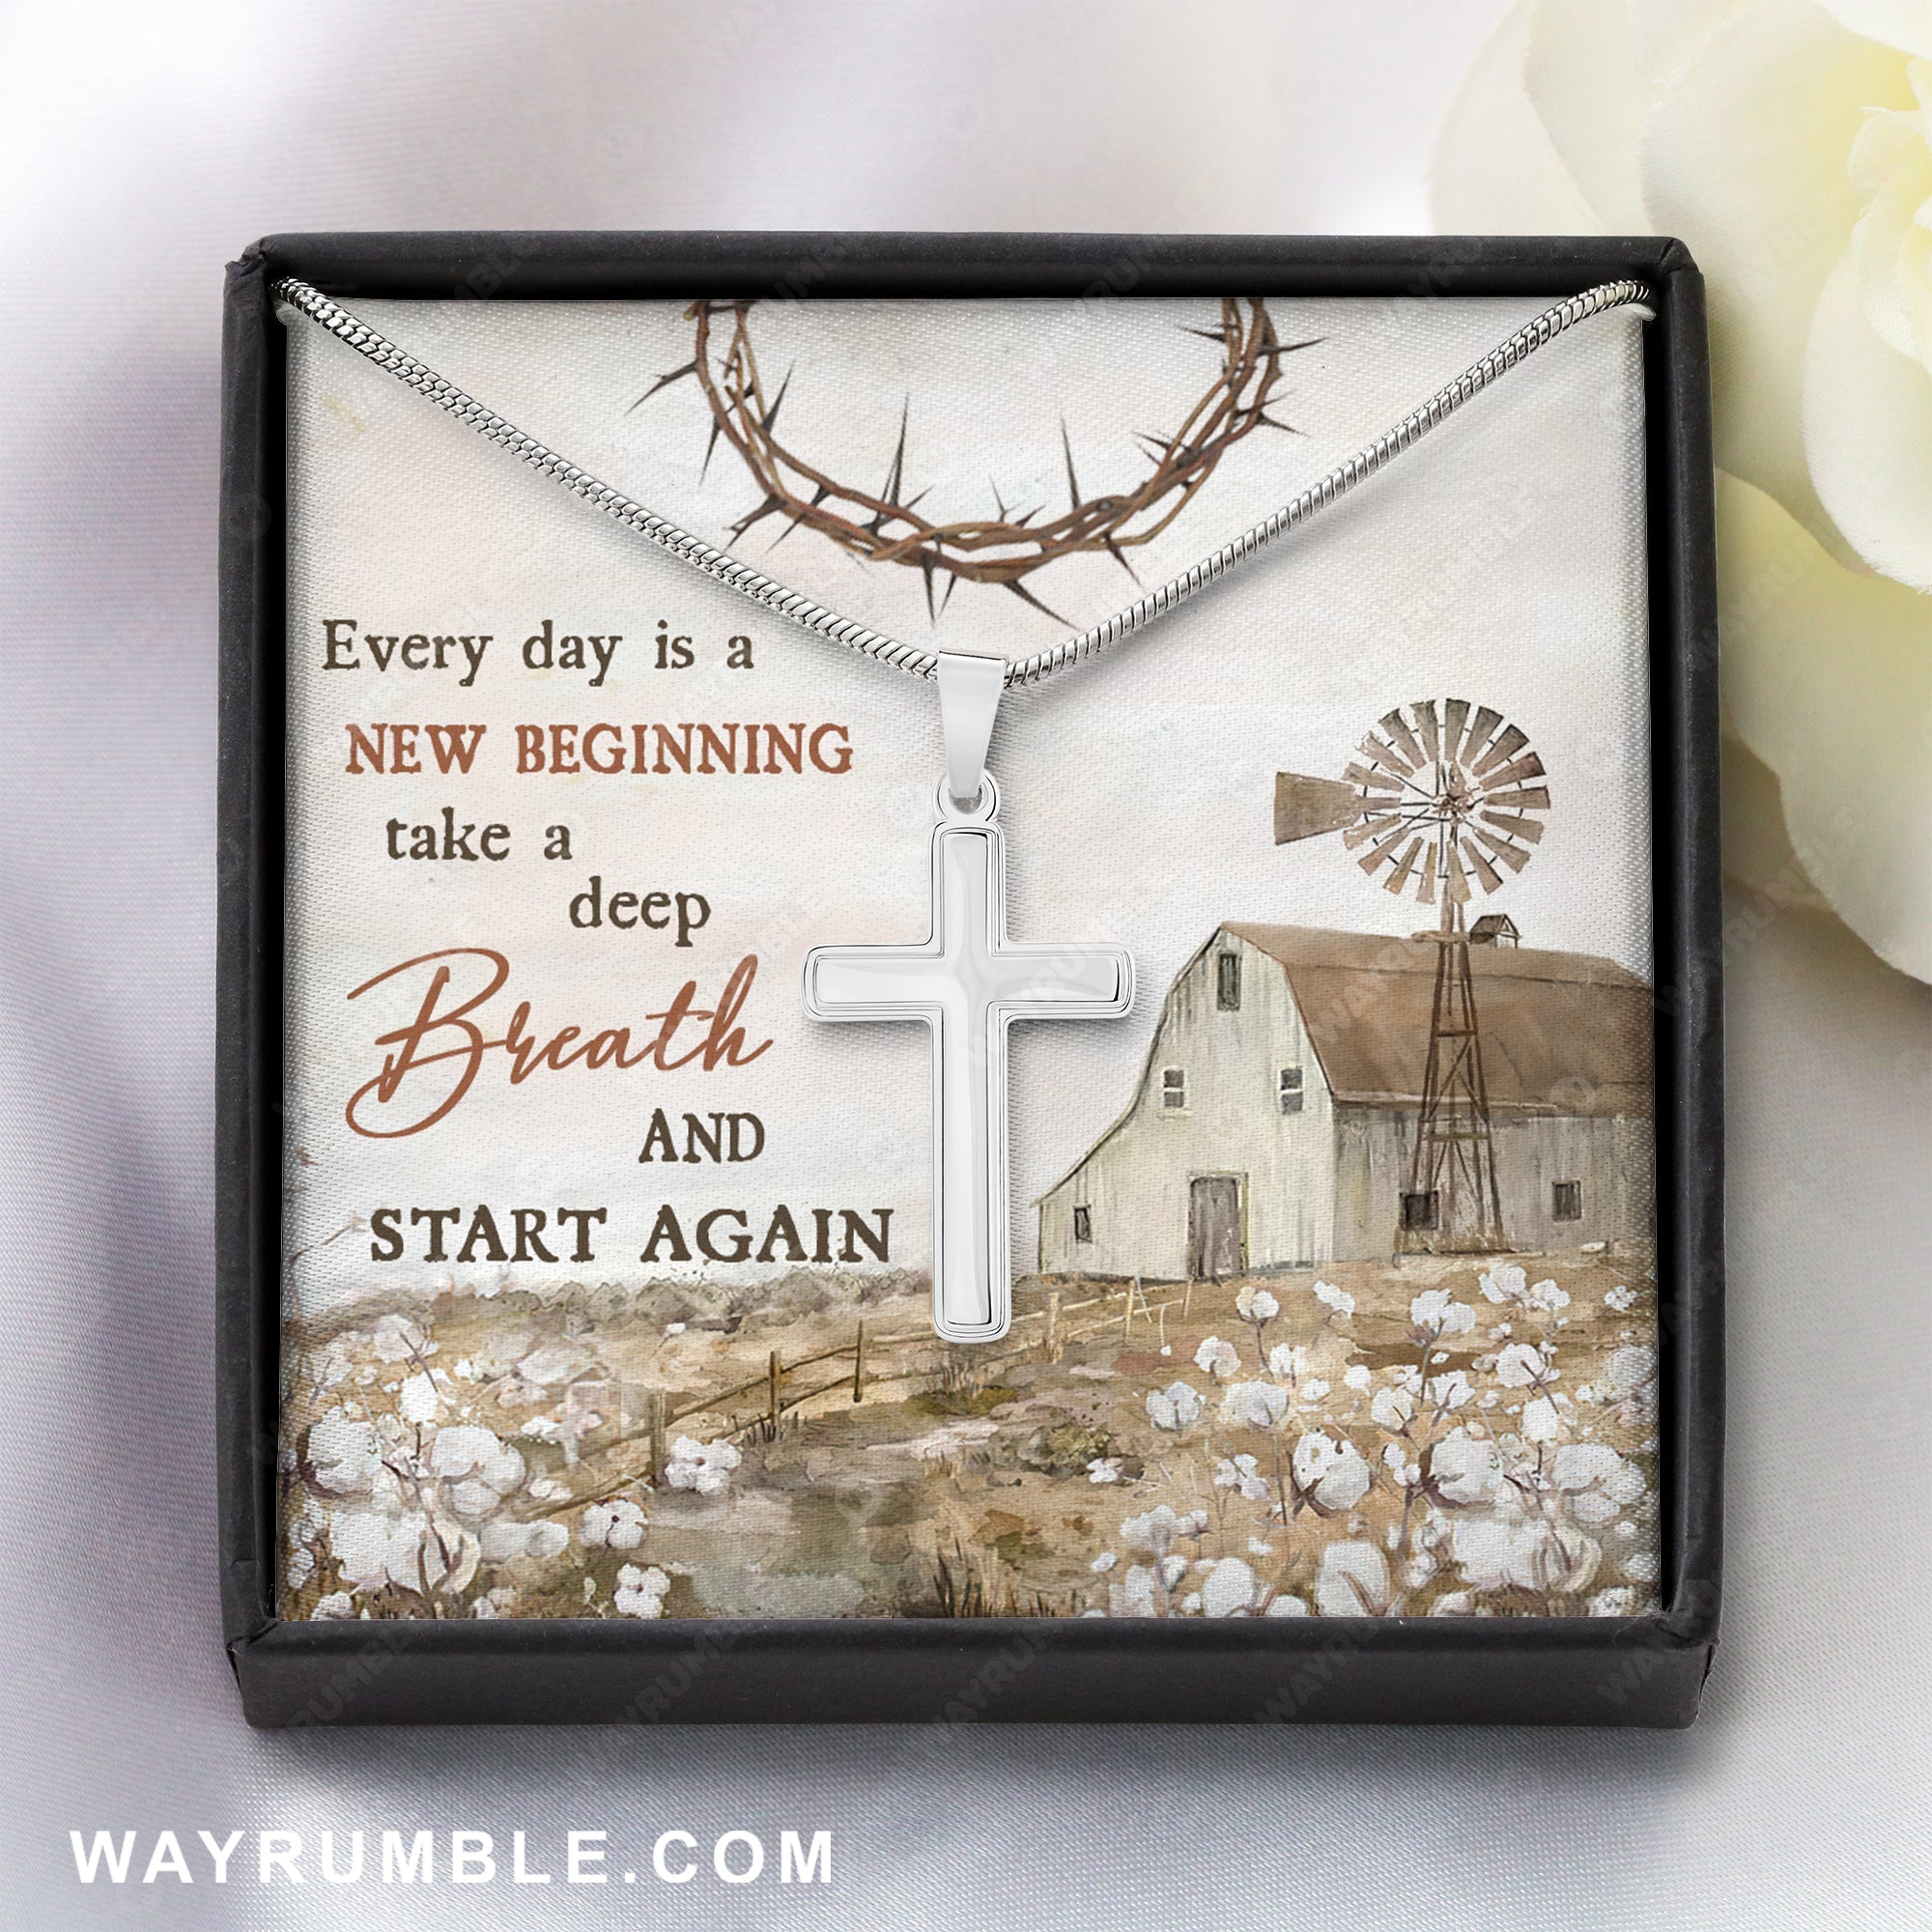 Cotton flower painting, Vintage house, Every day is a new beginning - Jesus Cross Necklace with Mess Card